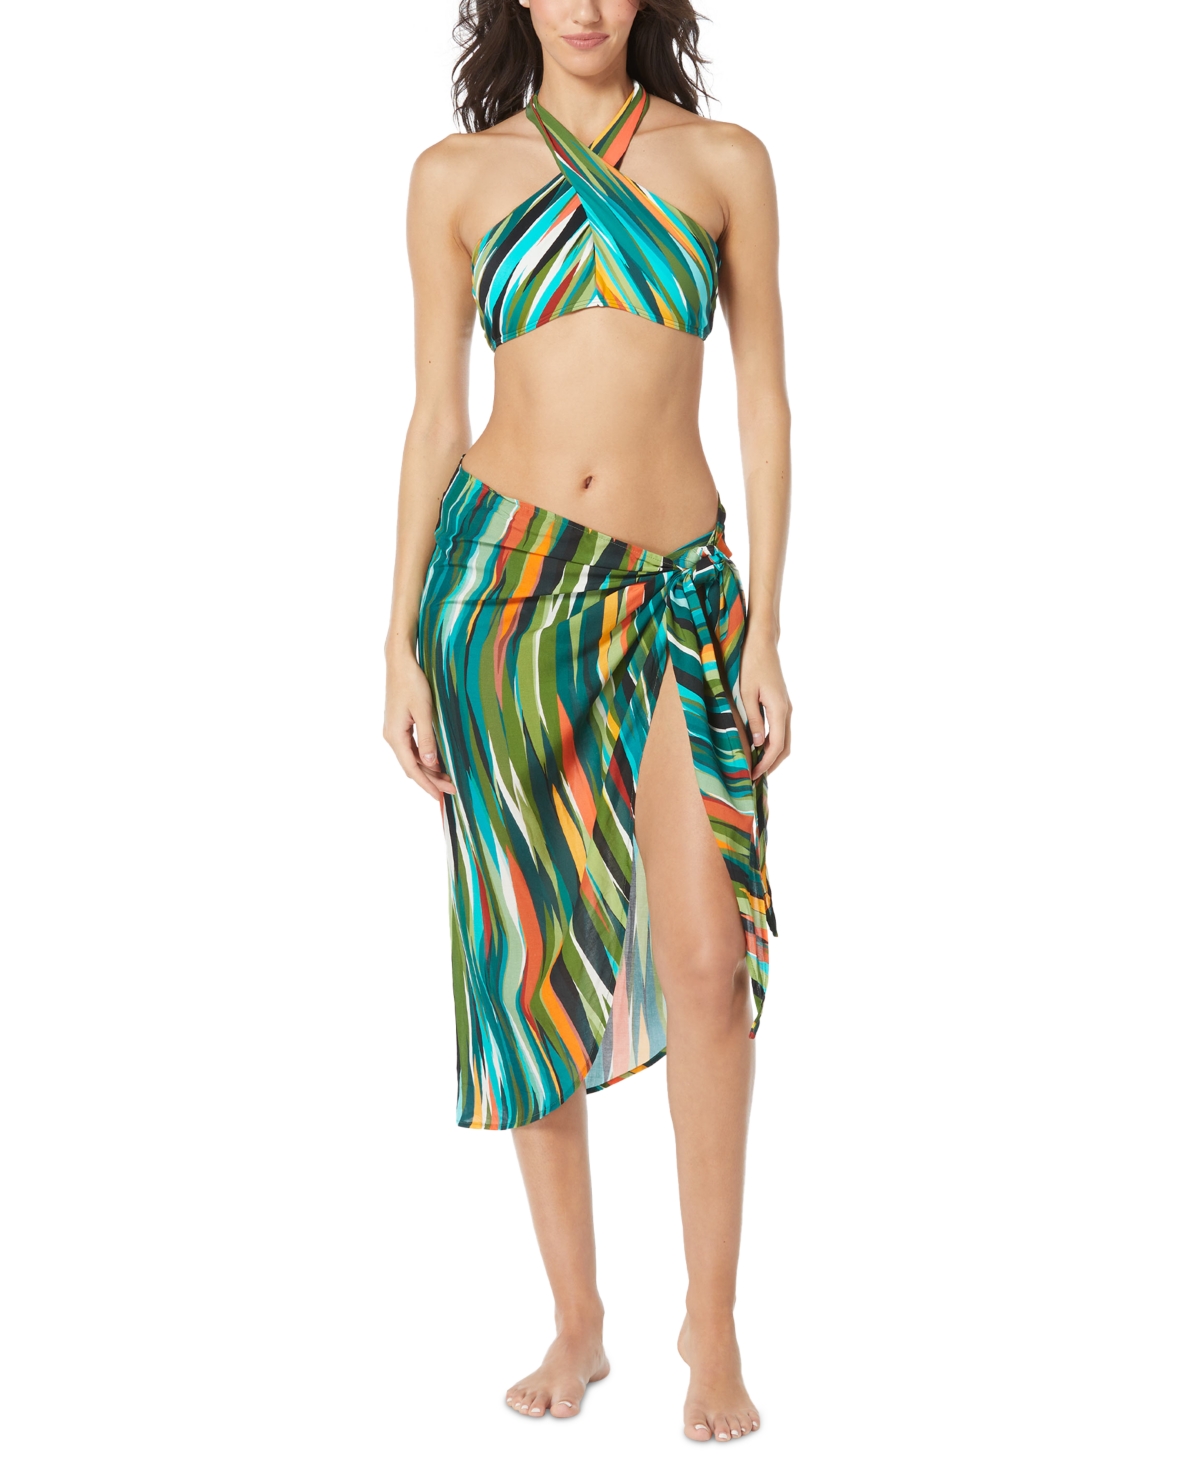 Vince Camuto Women's Printed Pareo Tie-front Swim Skirt Cover-up In Multi